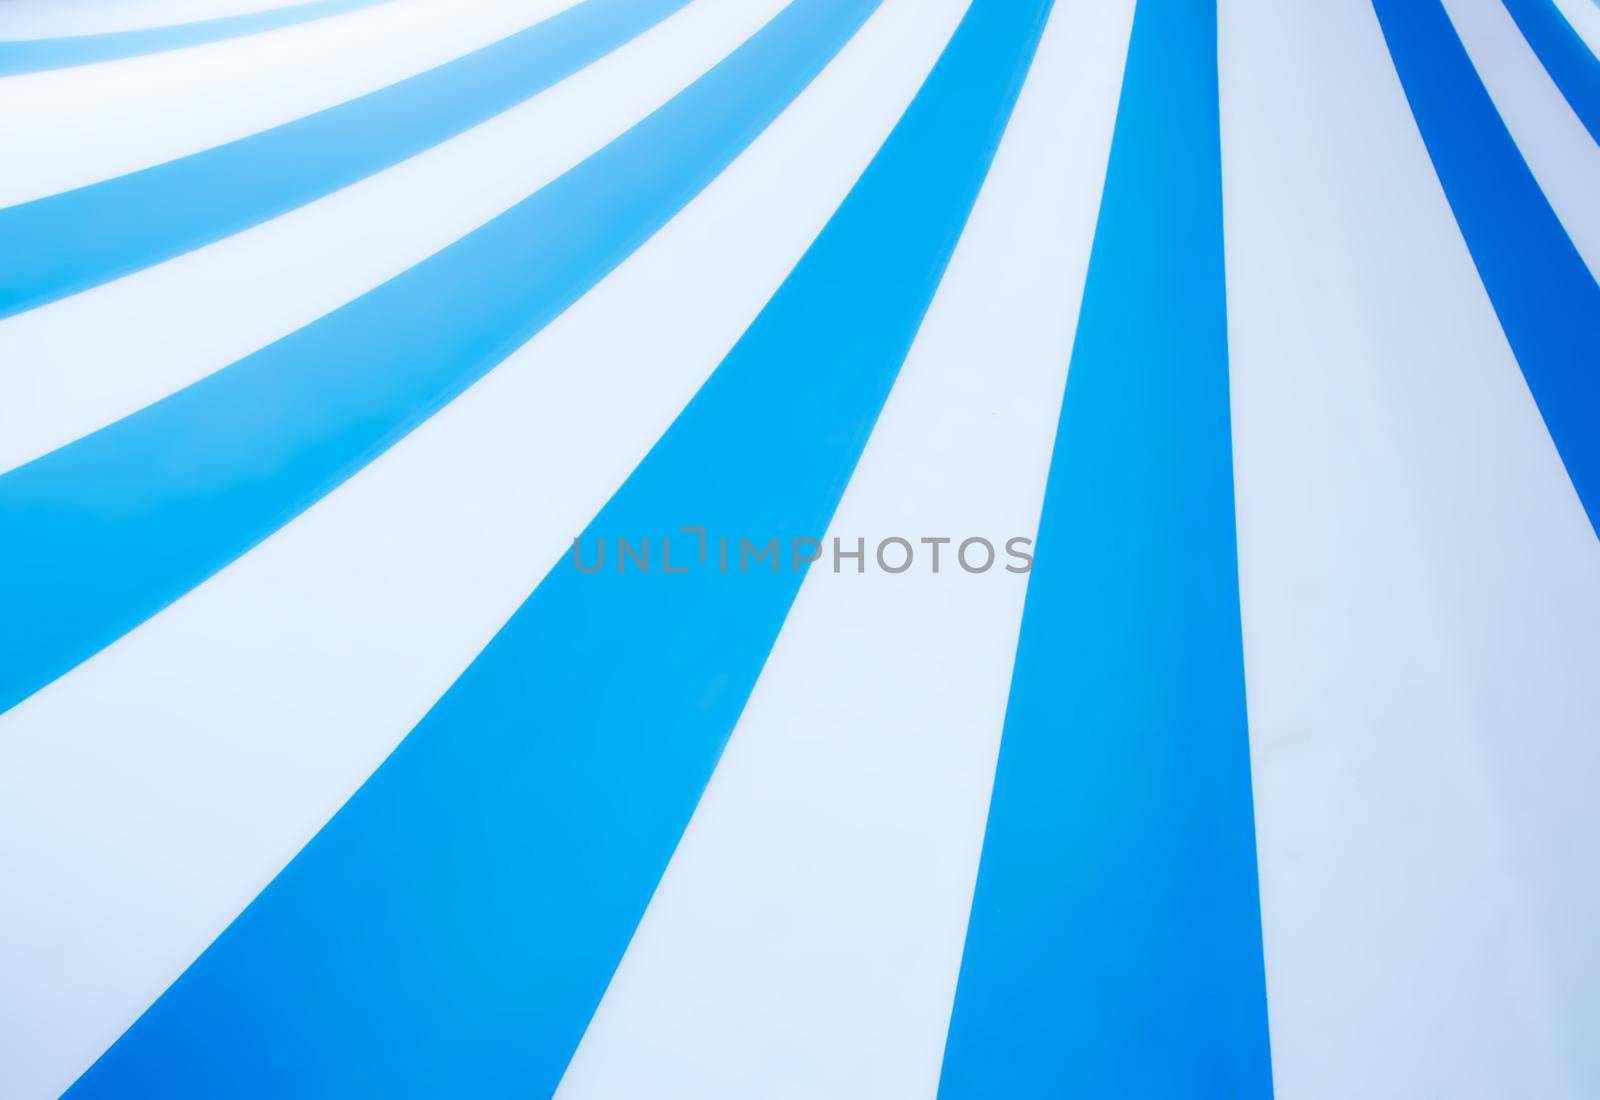 Abstract vintage pop art background design with thick blue and white stripes with copyspace for text by tennesseewitney